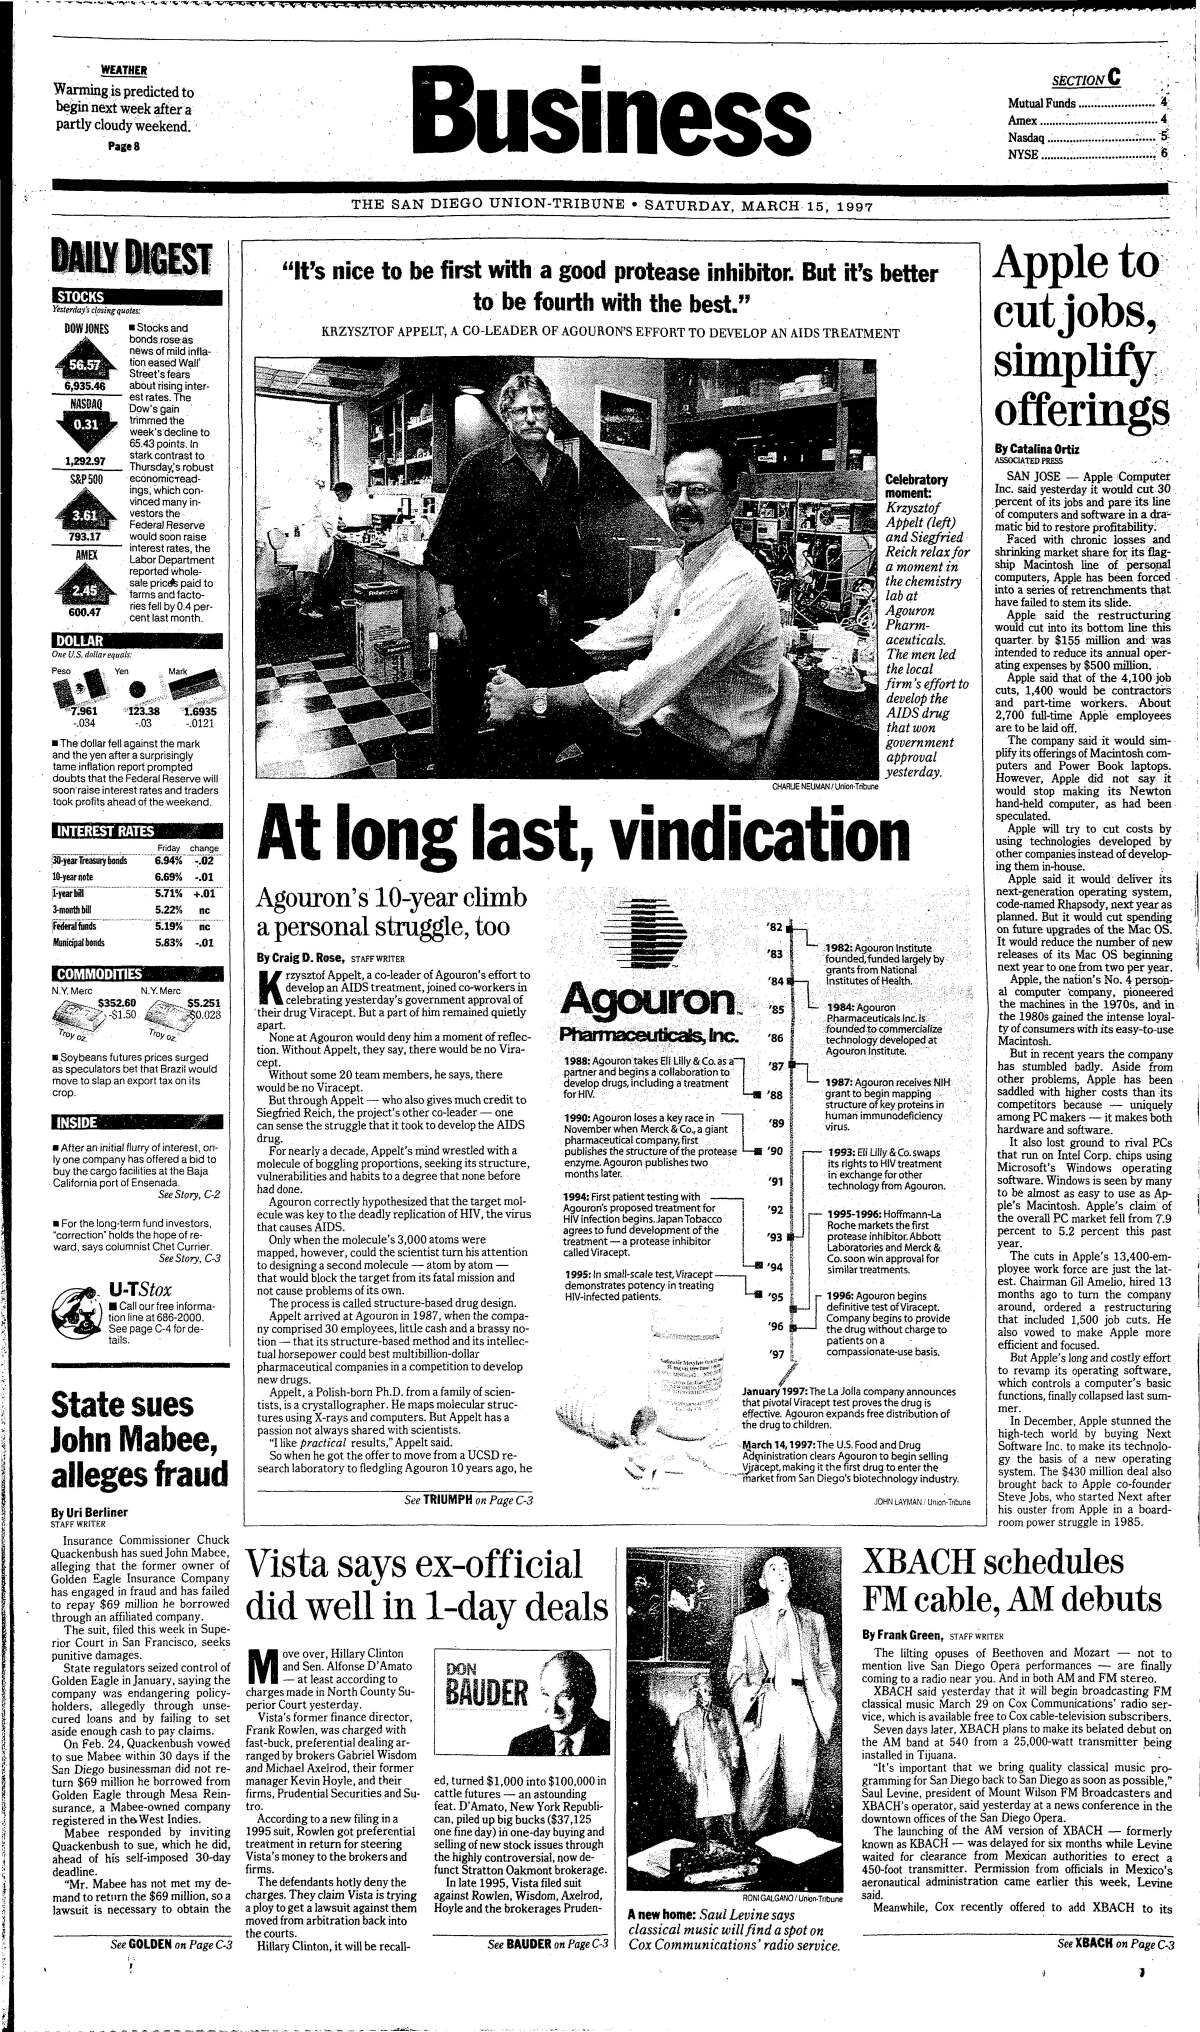 Agouron's Viracept on the front page of the business section of The San Diego Union-Tribune, March 15, 1997.